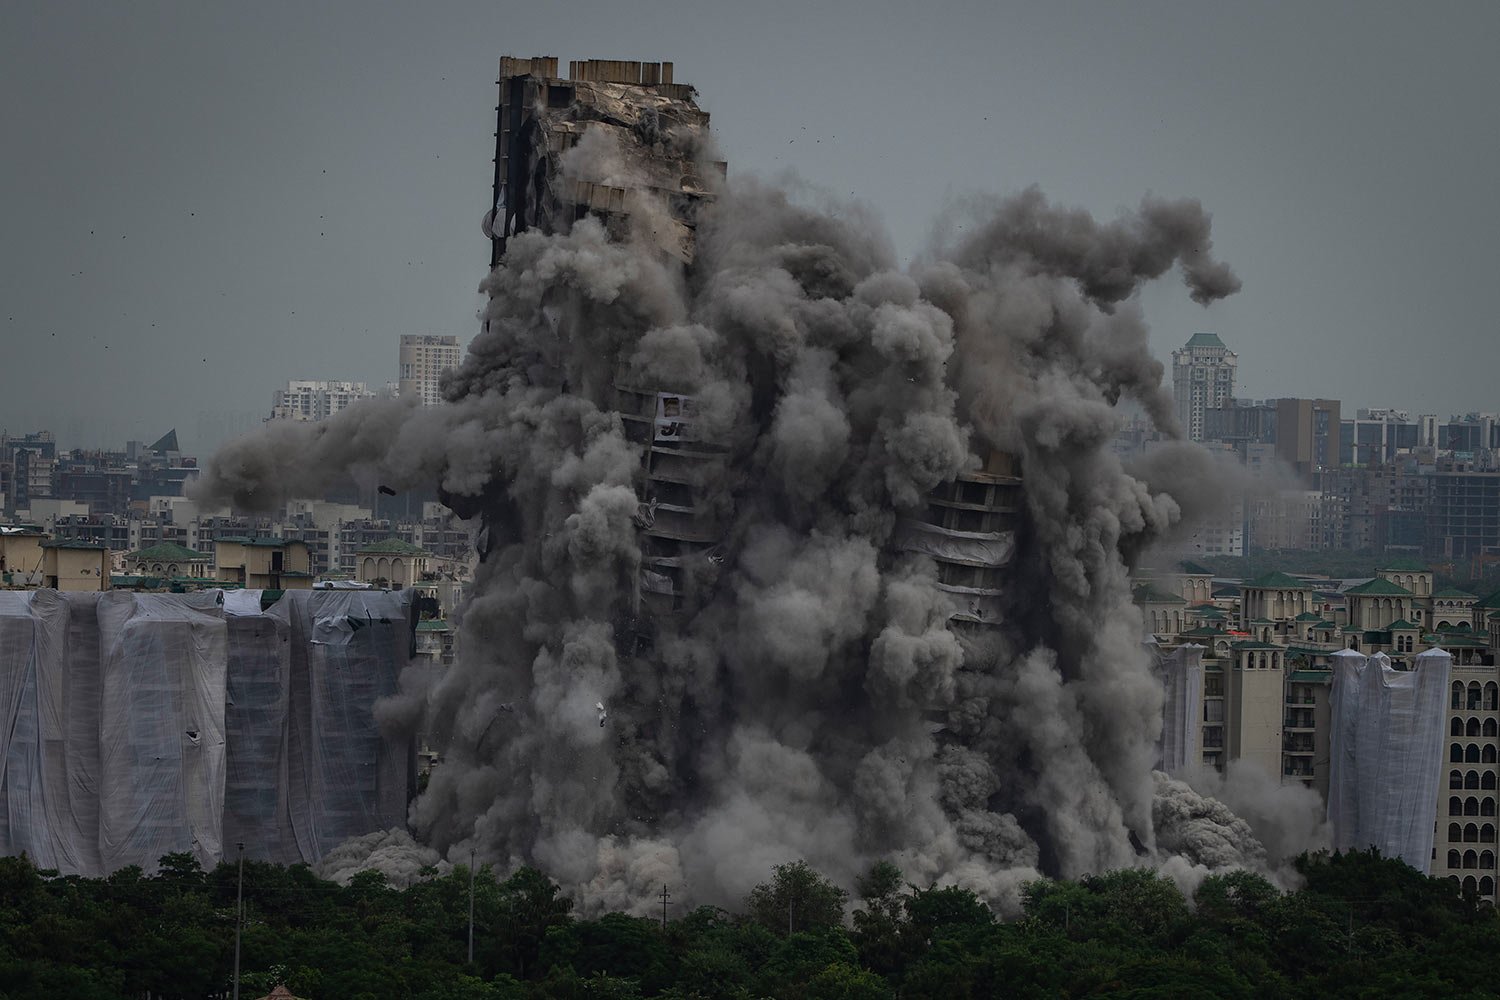  Cloud of dust rises as twin high-rise apartment towers are razed to ground in Noida, outskirts of New Delhi, India, Sunday, Aug. 28, 2022.  (AP Photo/Altaf Qadri) 